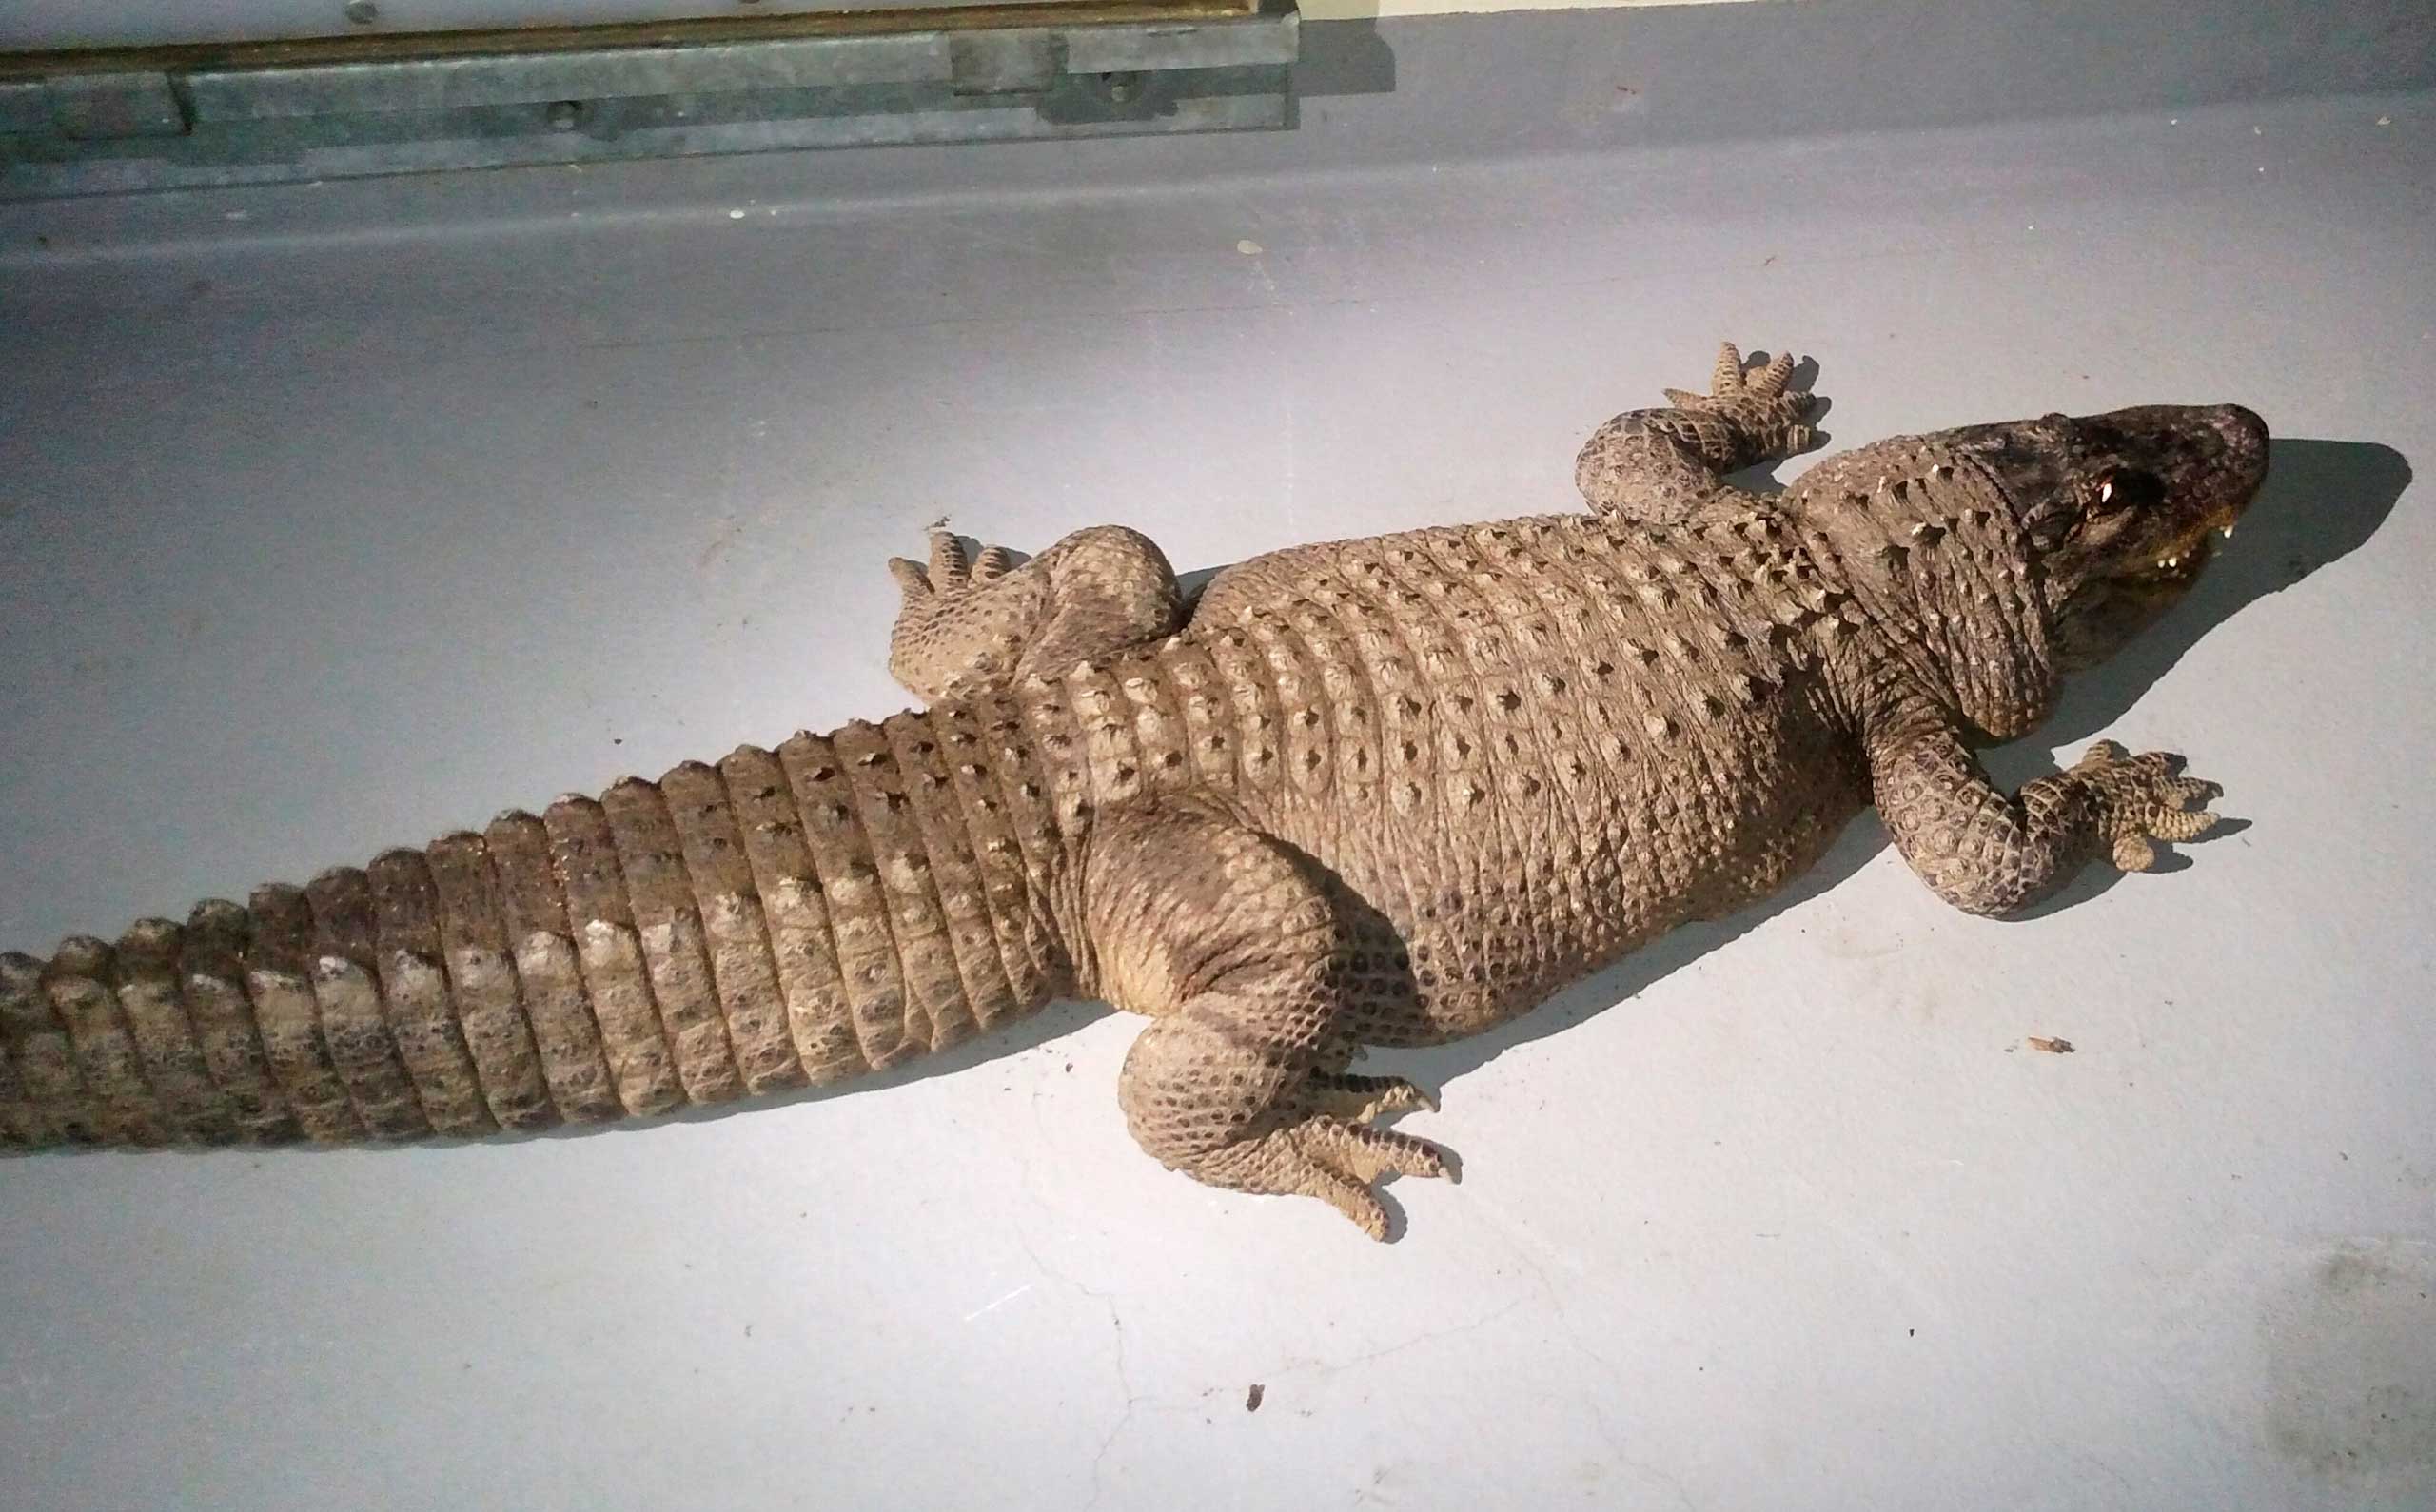 An 8-foot alligator was found in a box with two dead cats in the backyard of a home in the Van Nuys area of Los Angeles. (Los Angeles Animal Services Department/AP)